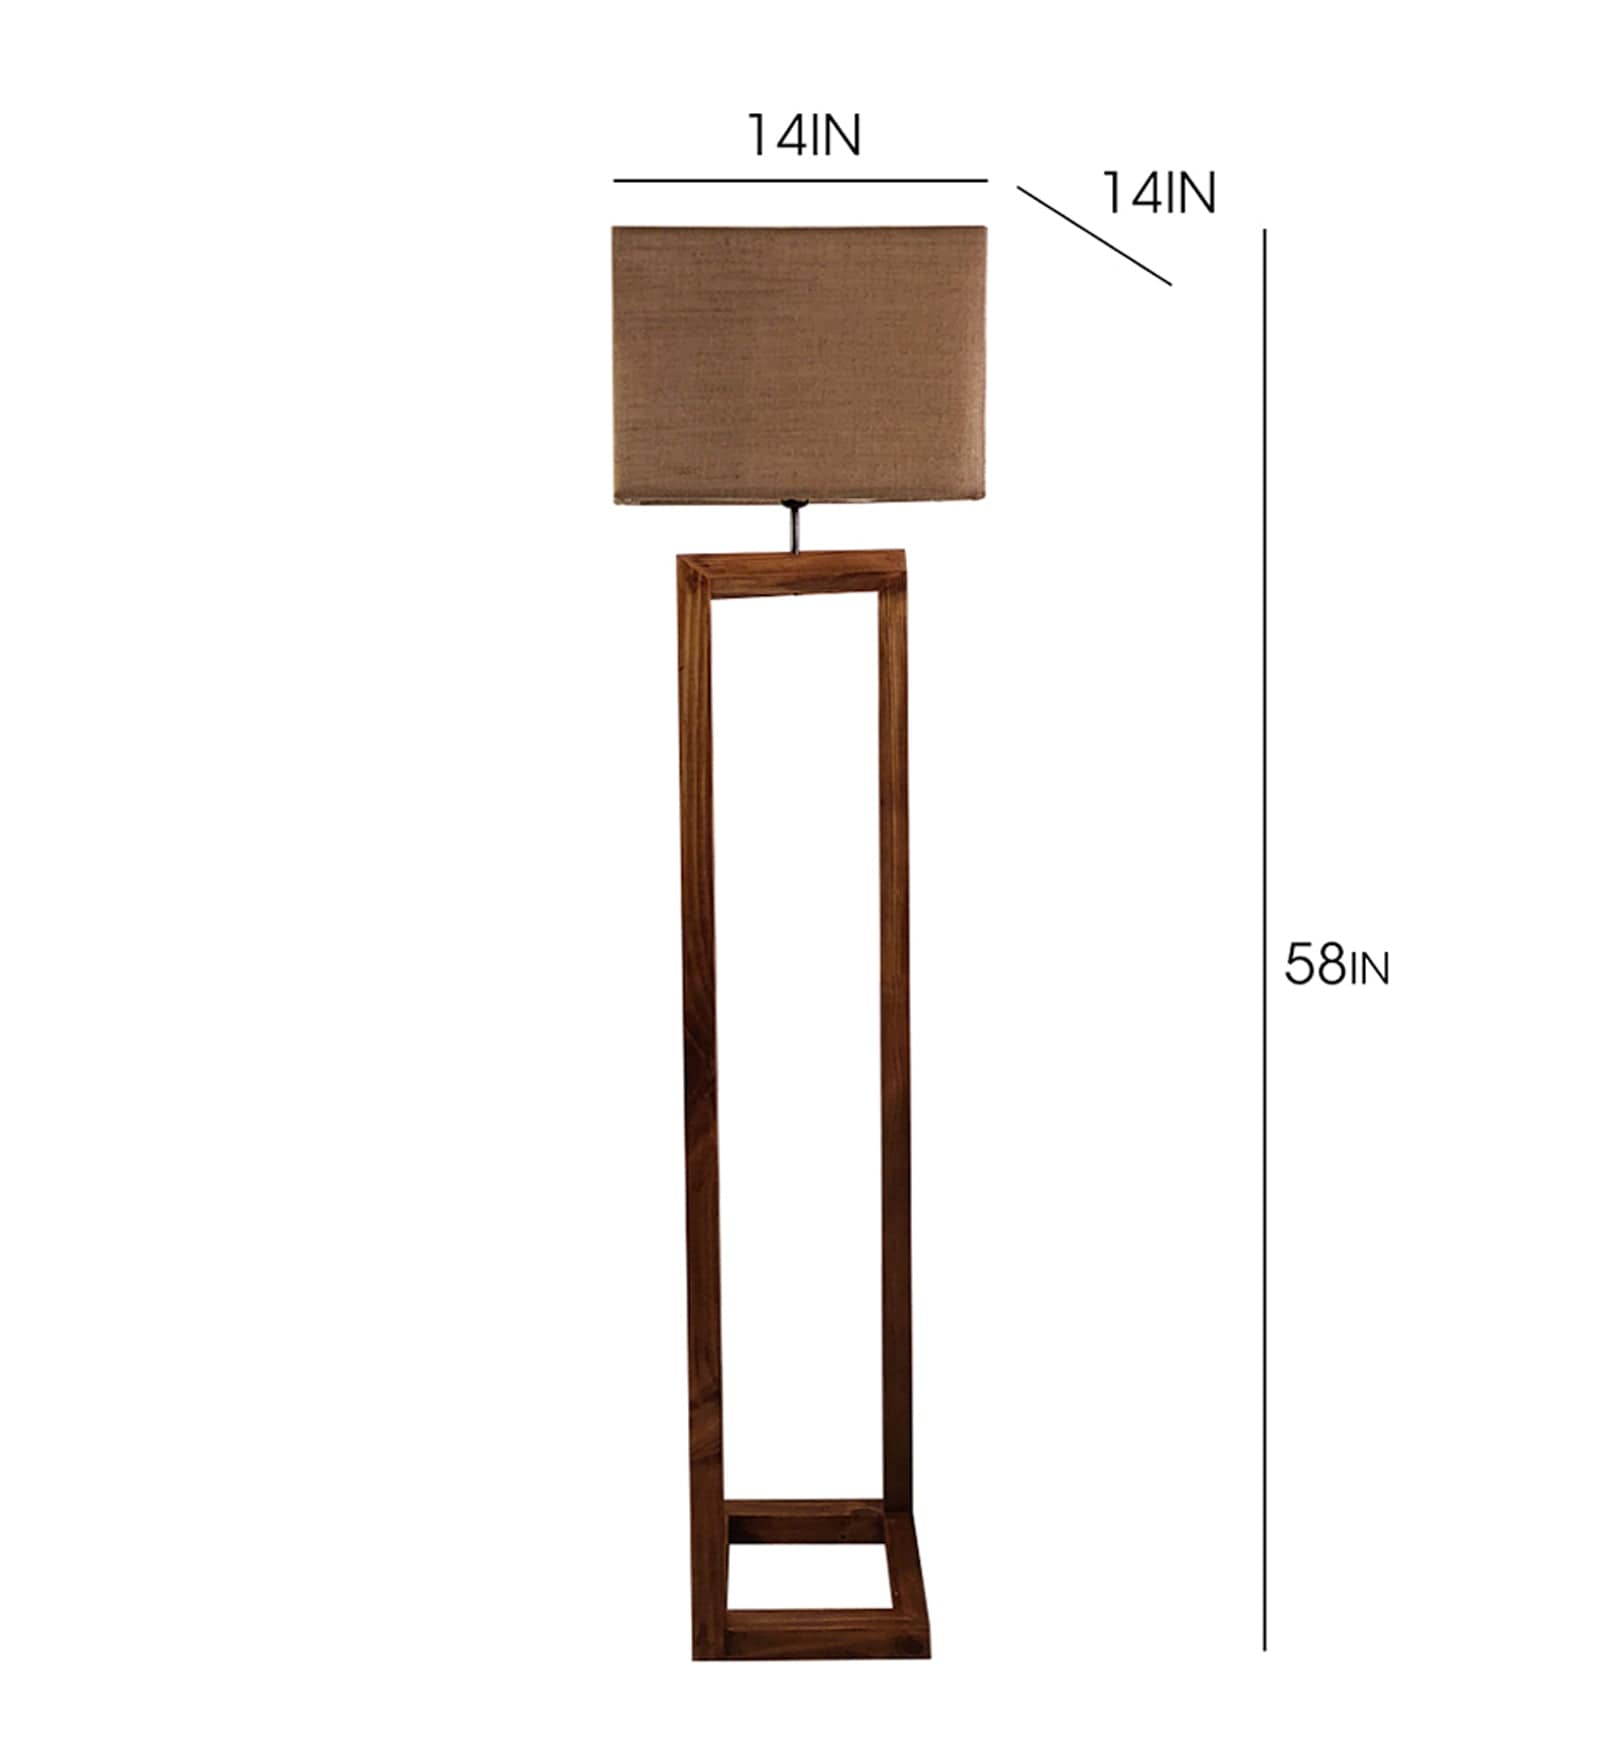 Tesseract Wooden Floor Lamp with Brown Base Beige Fabric Lampshade (BULB NOT INCLUDED)